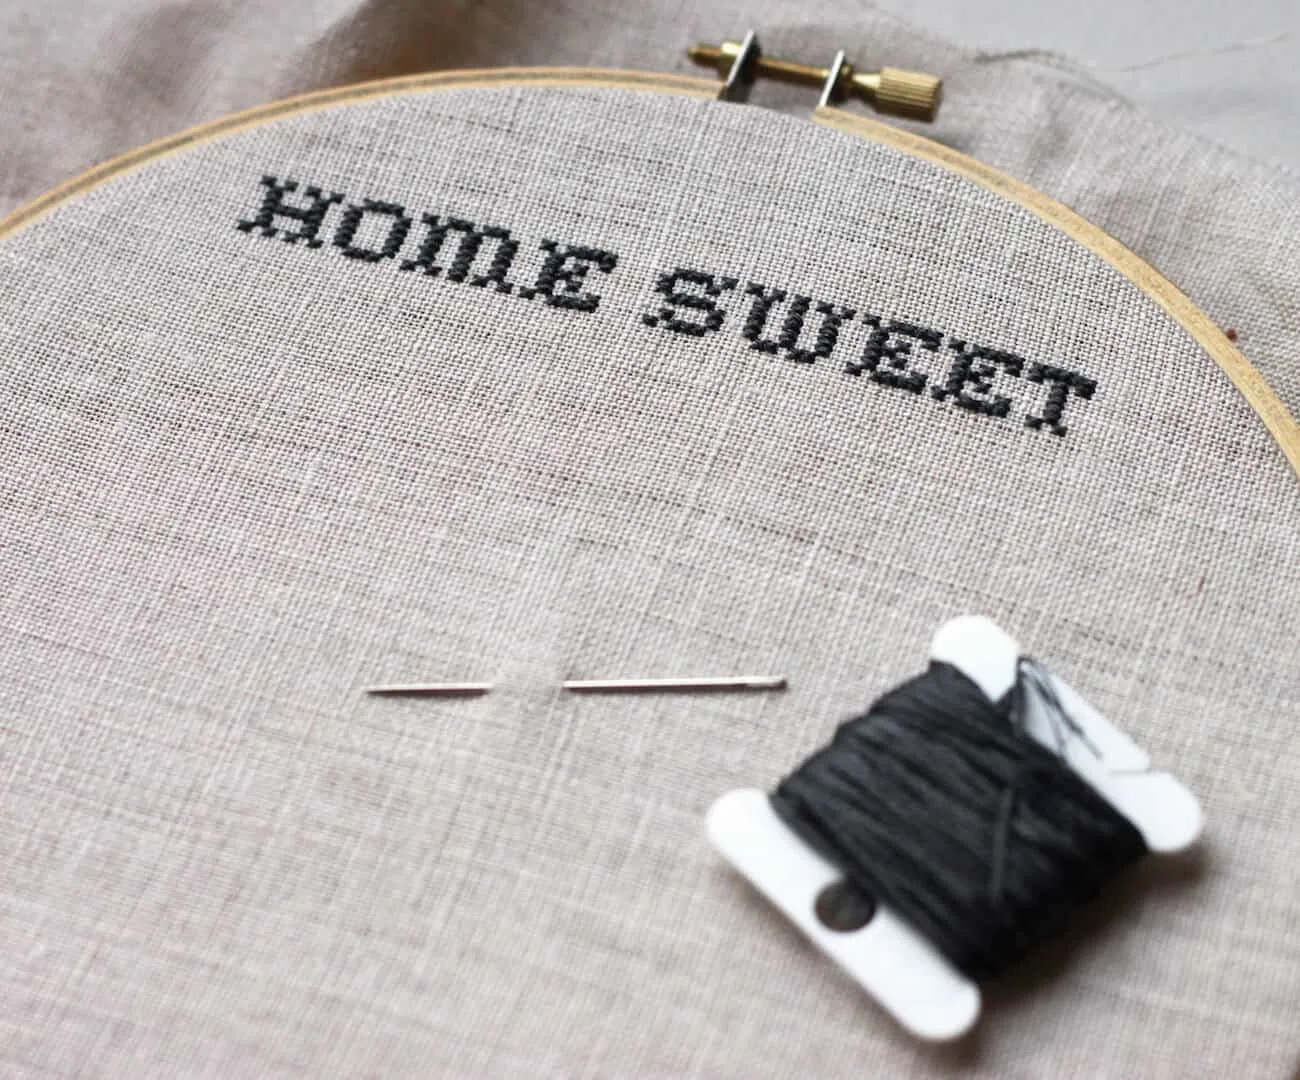 Halloween Embroidery: Home Sweet Haunted Home - DIY Candy